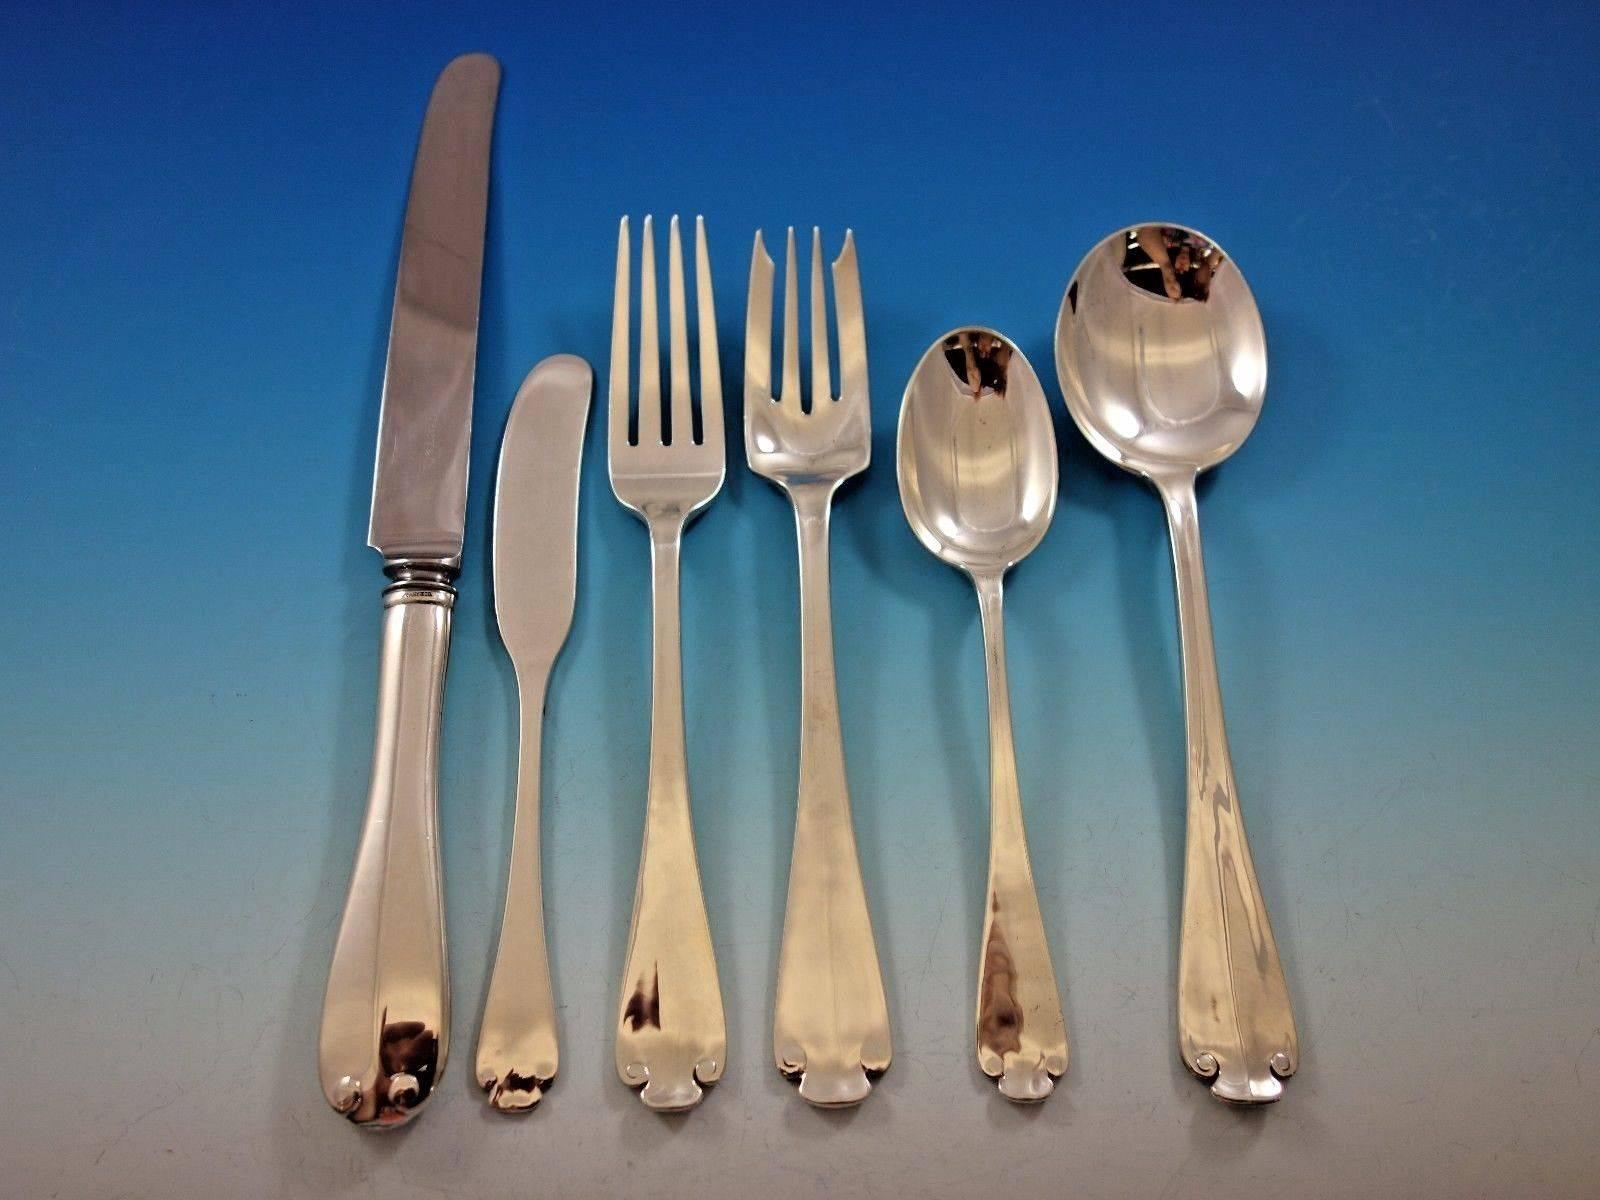 Flemish by Tiffany & Co. sterling silver flatware set of 50 pieces. This set includes: 

Eight knives, 9 1/4